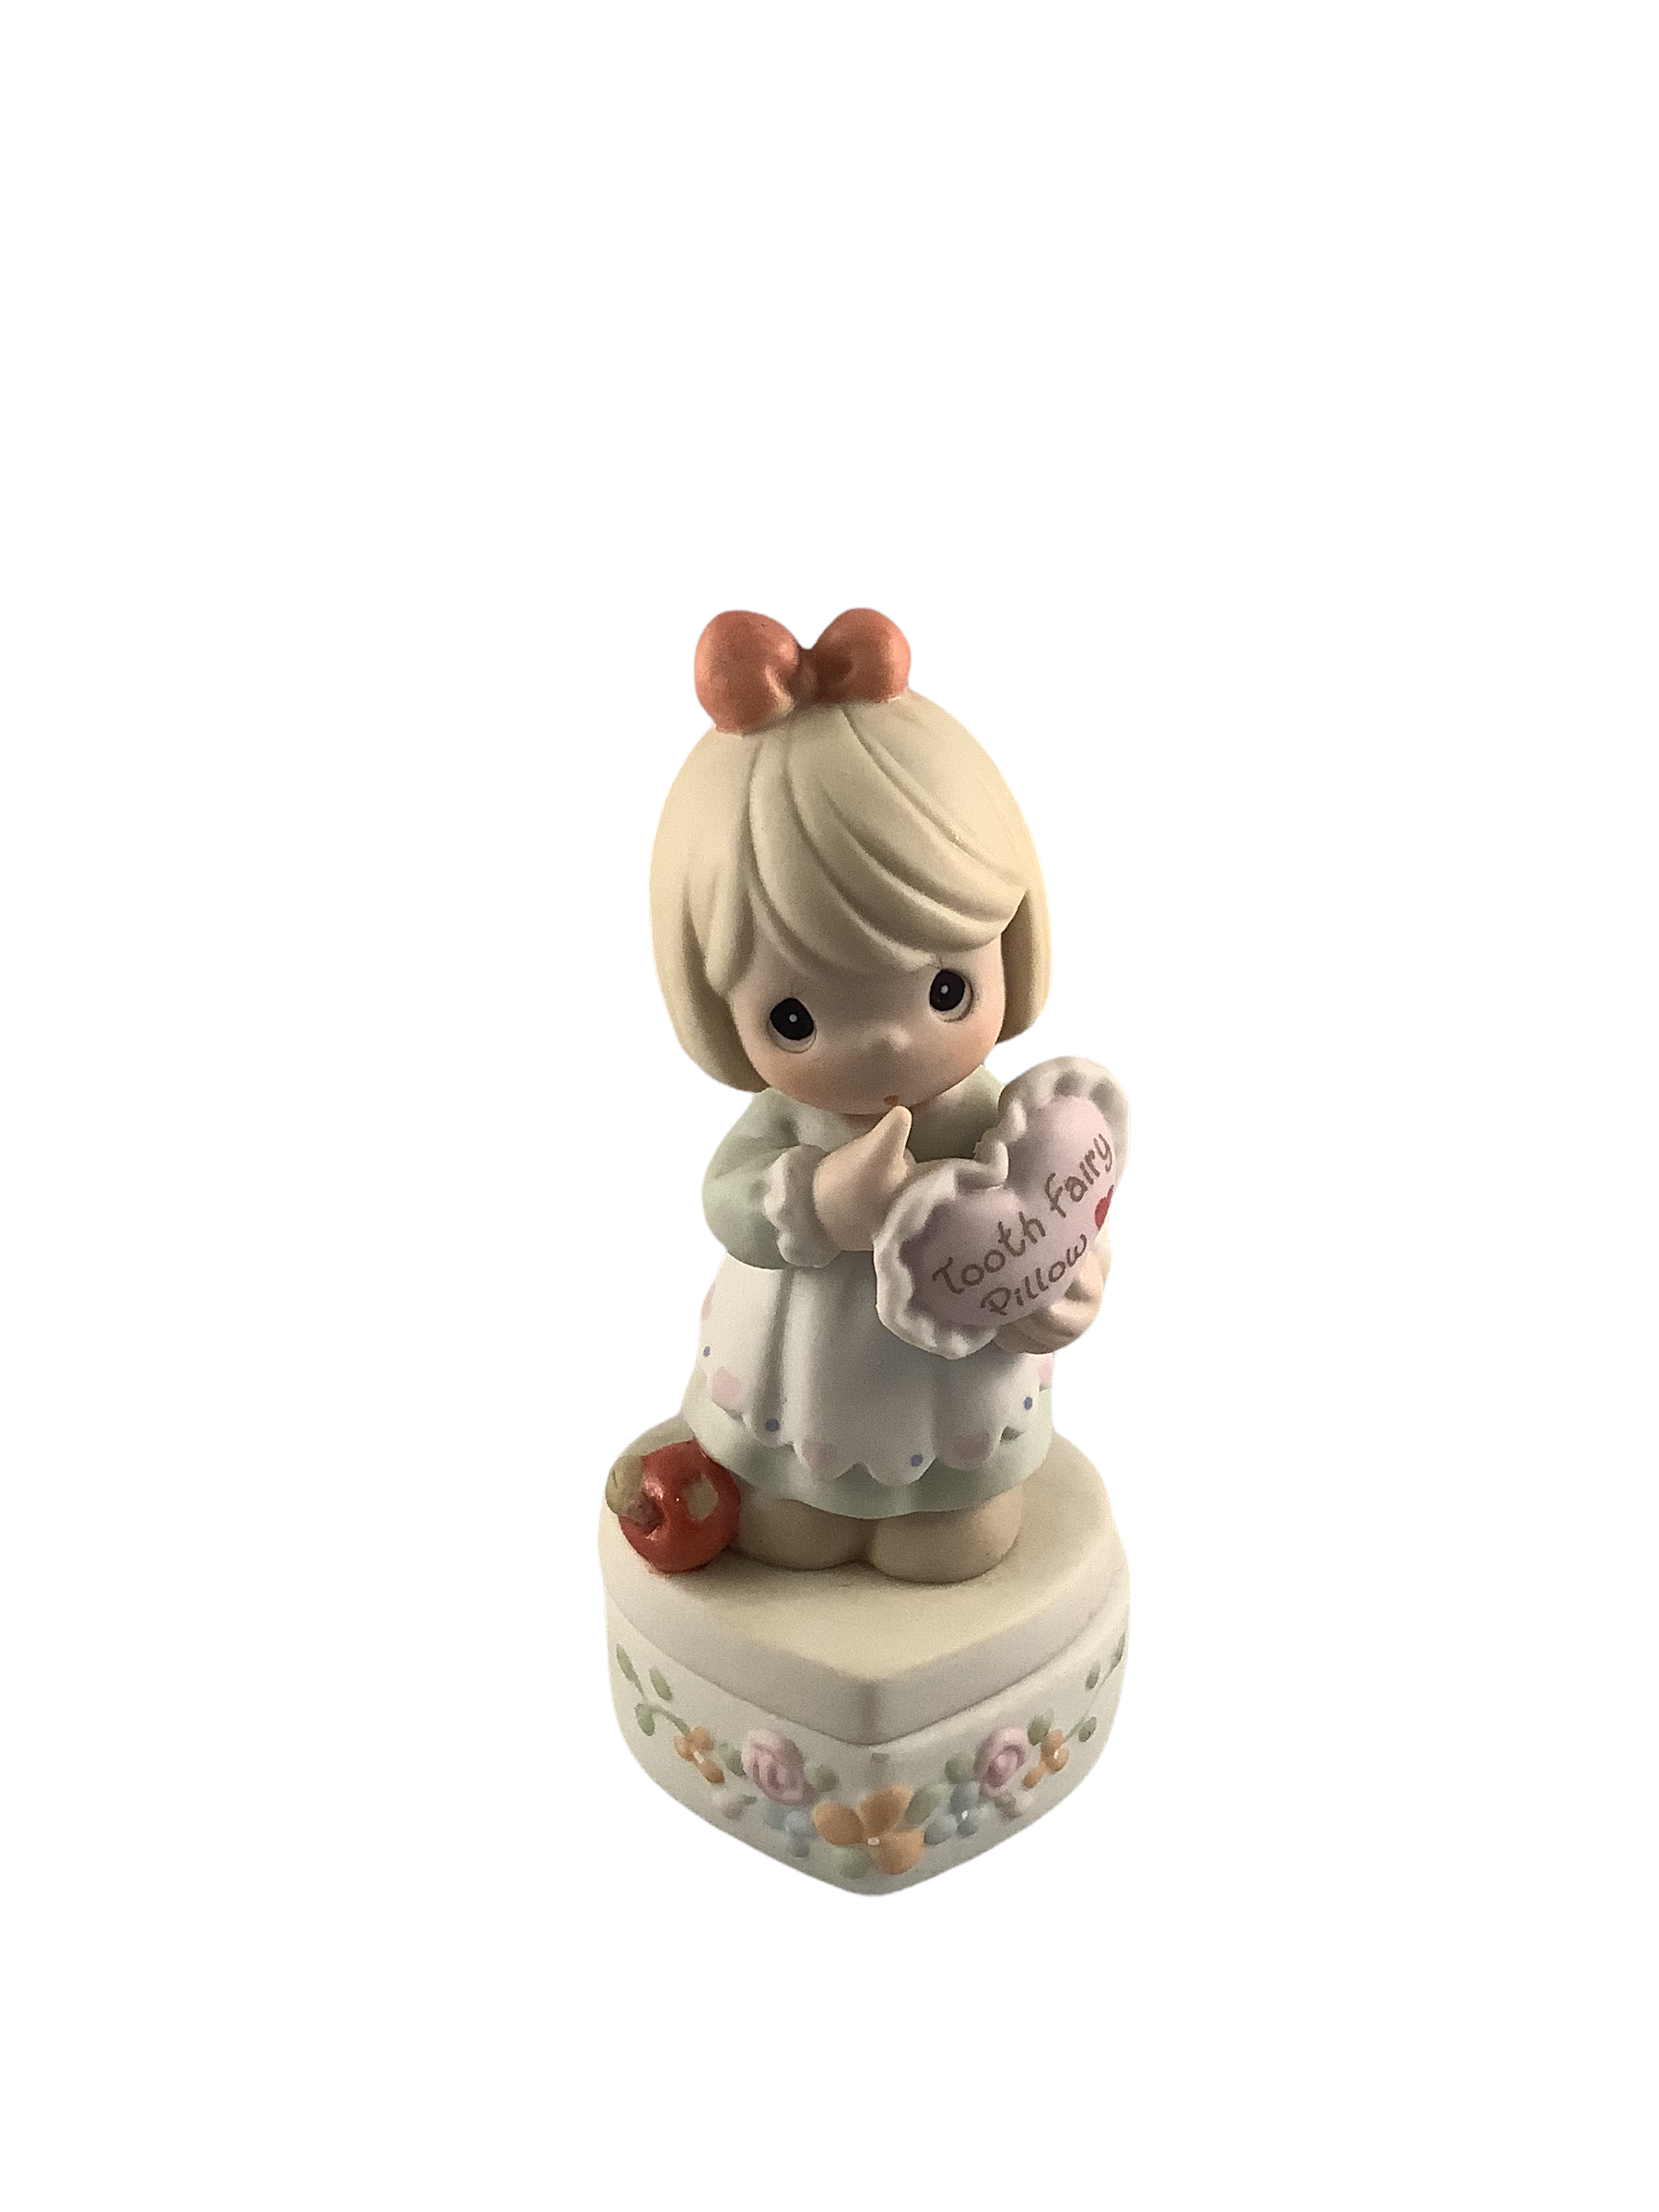 You're Just Too Thweet - Precious Moment Figurine